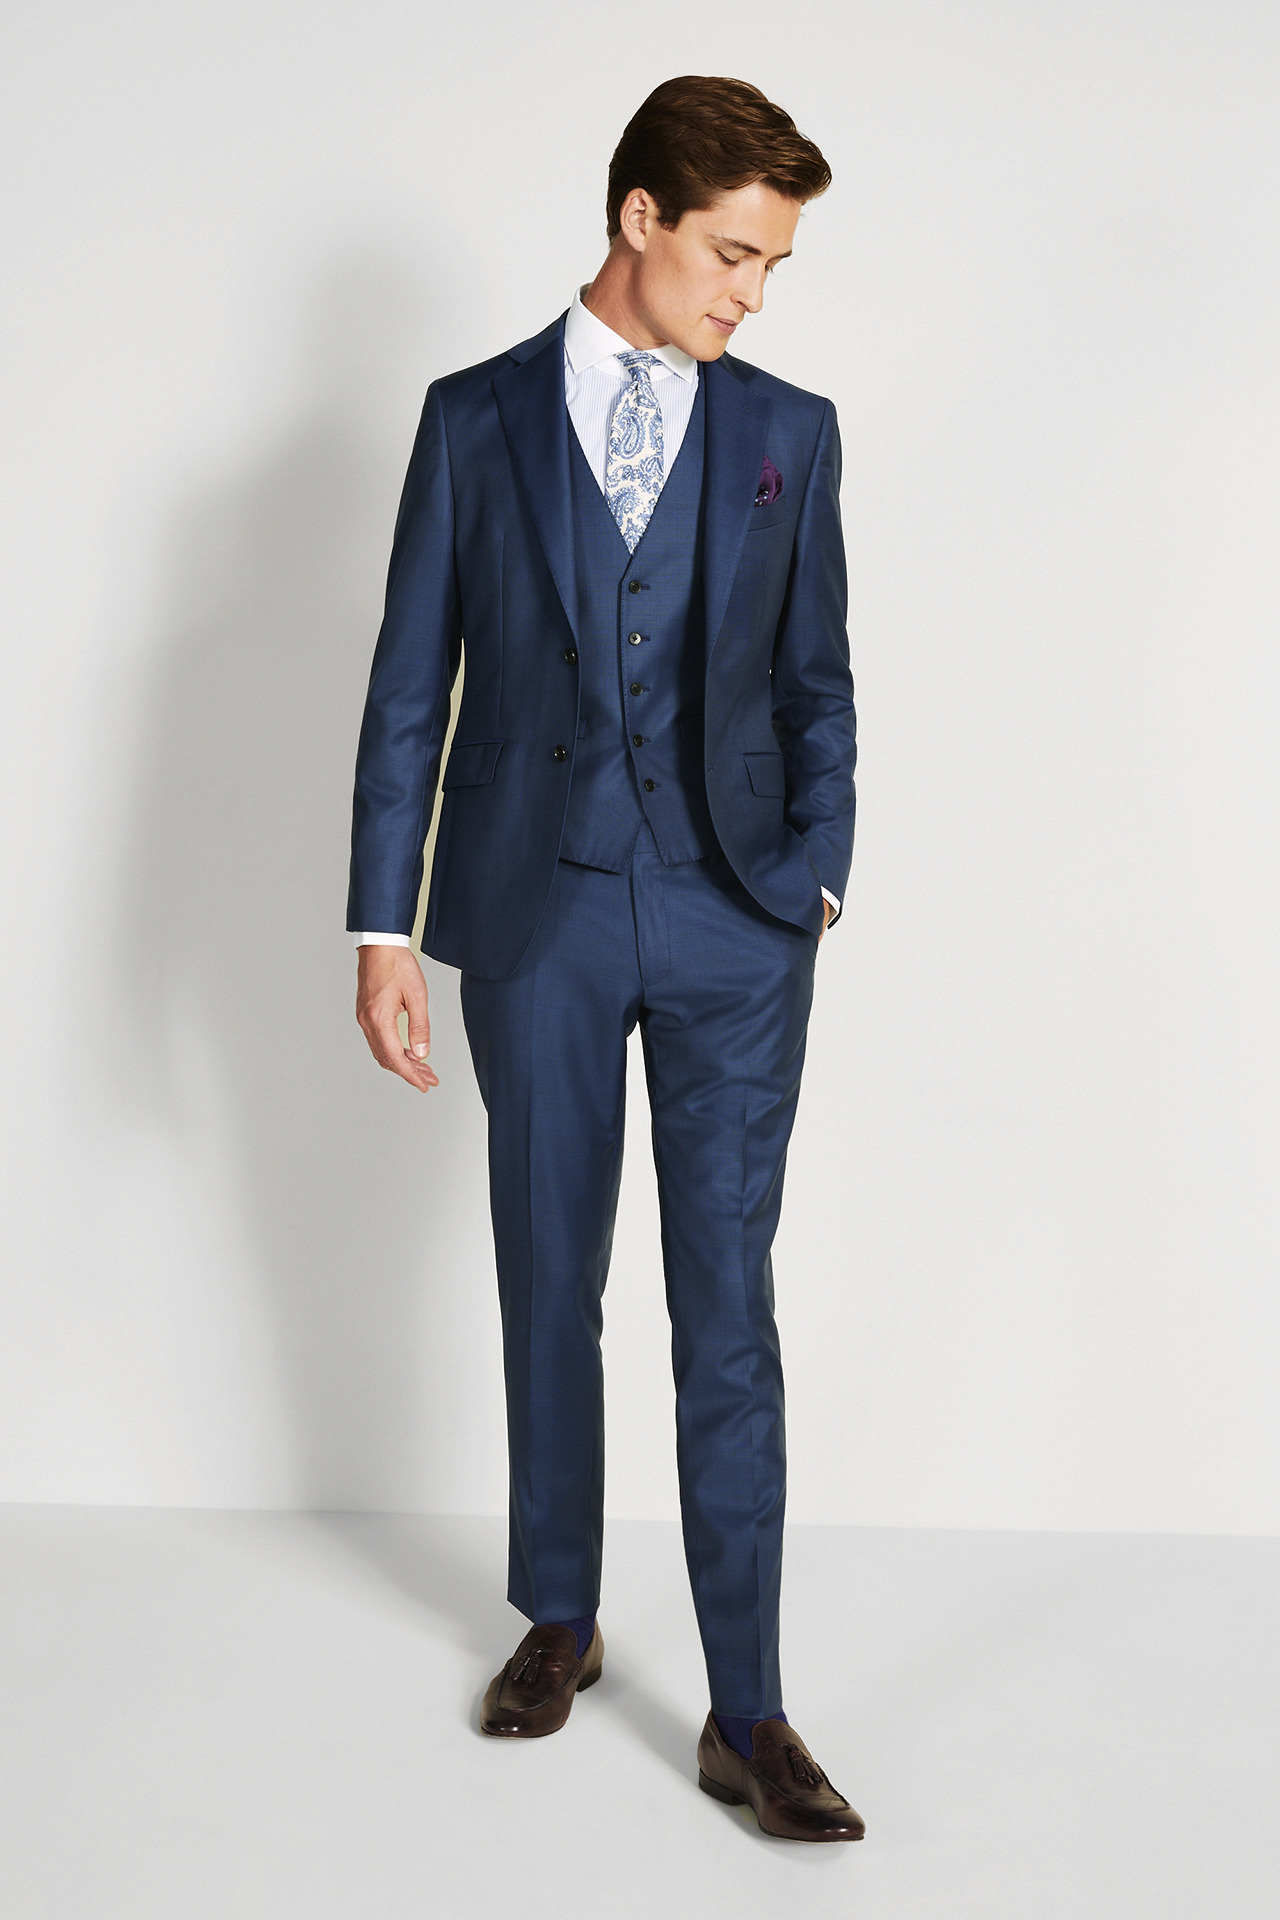 semi-formal attire: three-piece navy blue suit, white shirt and blue floral tie